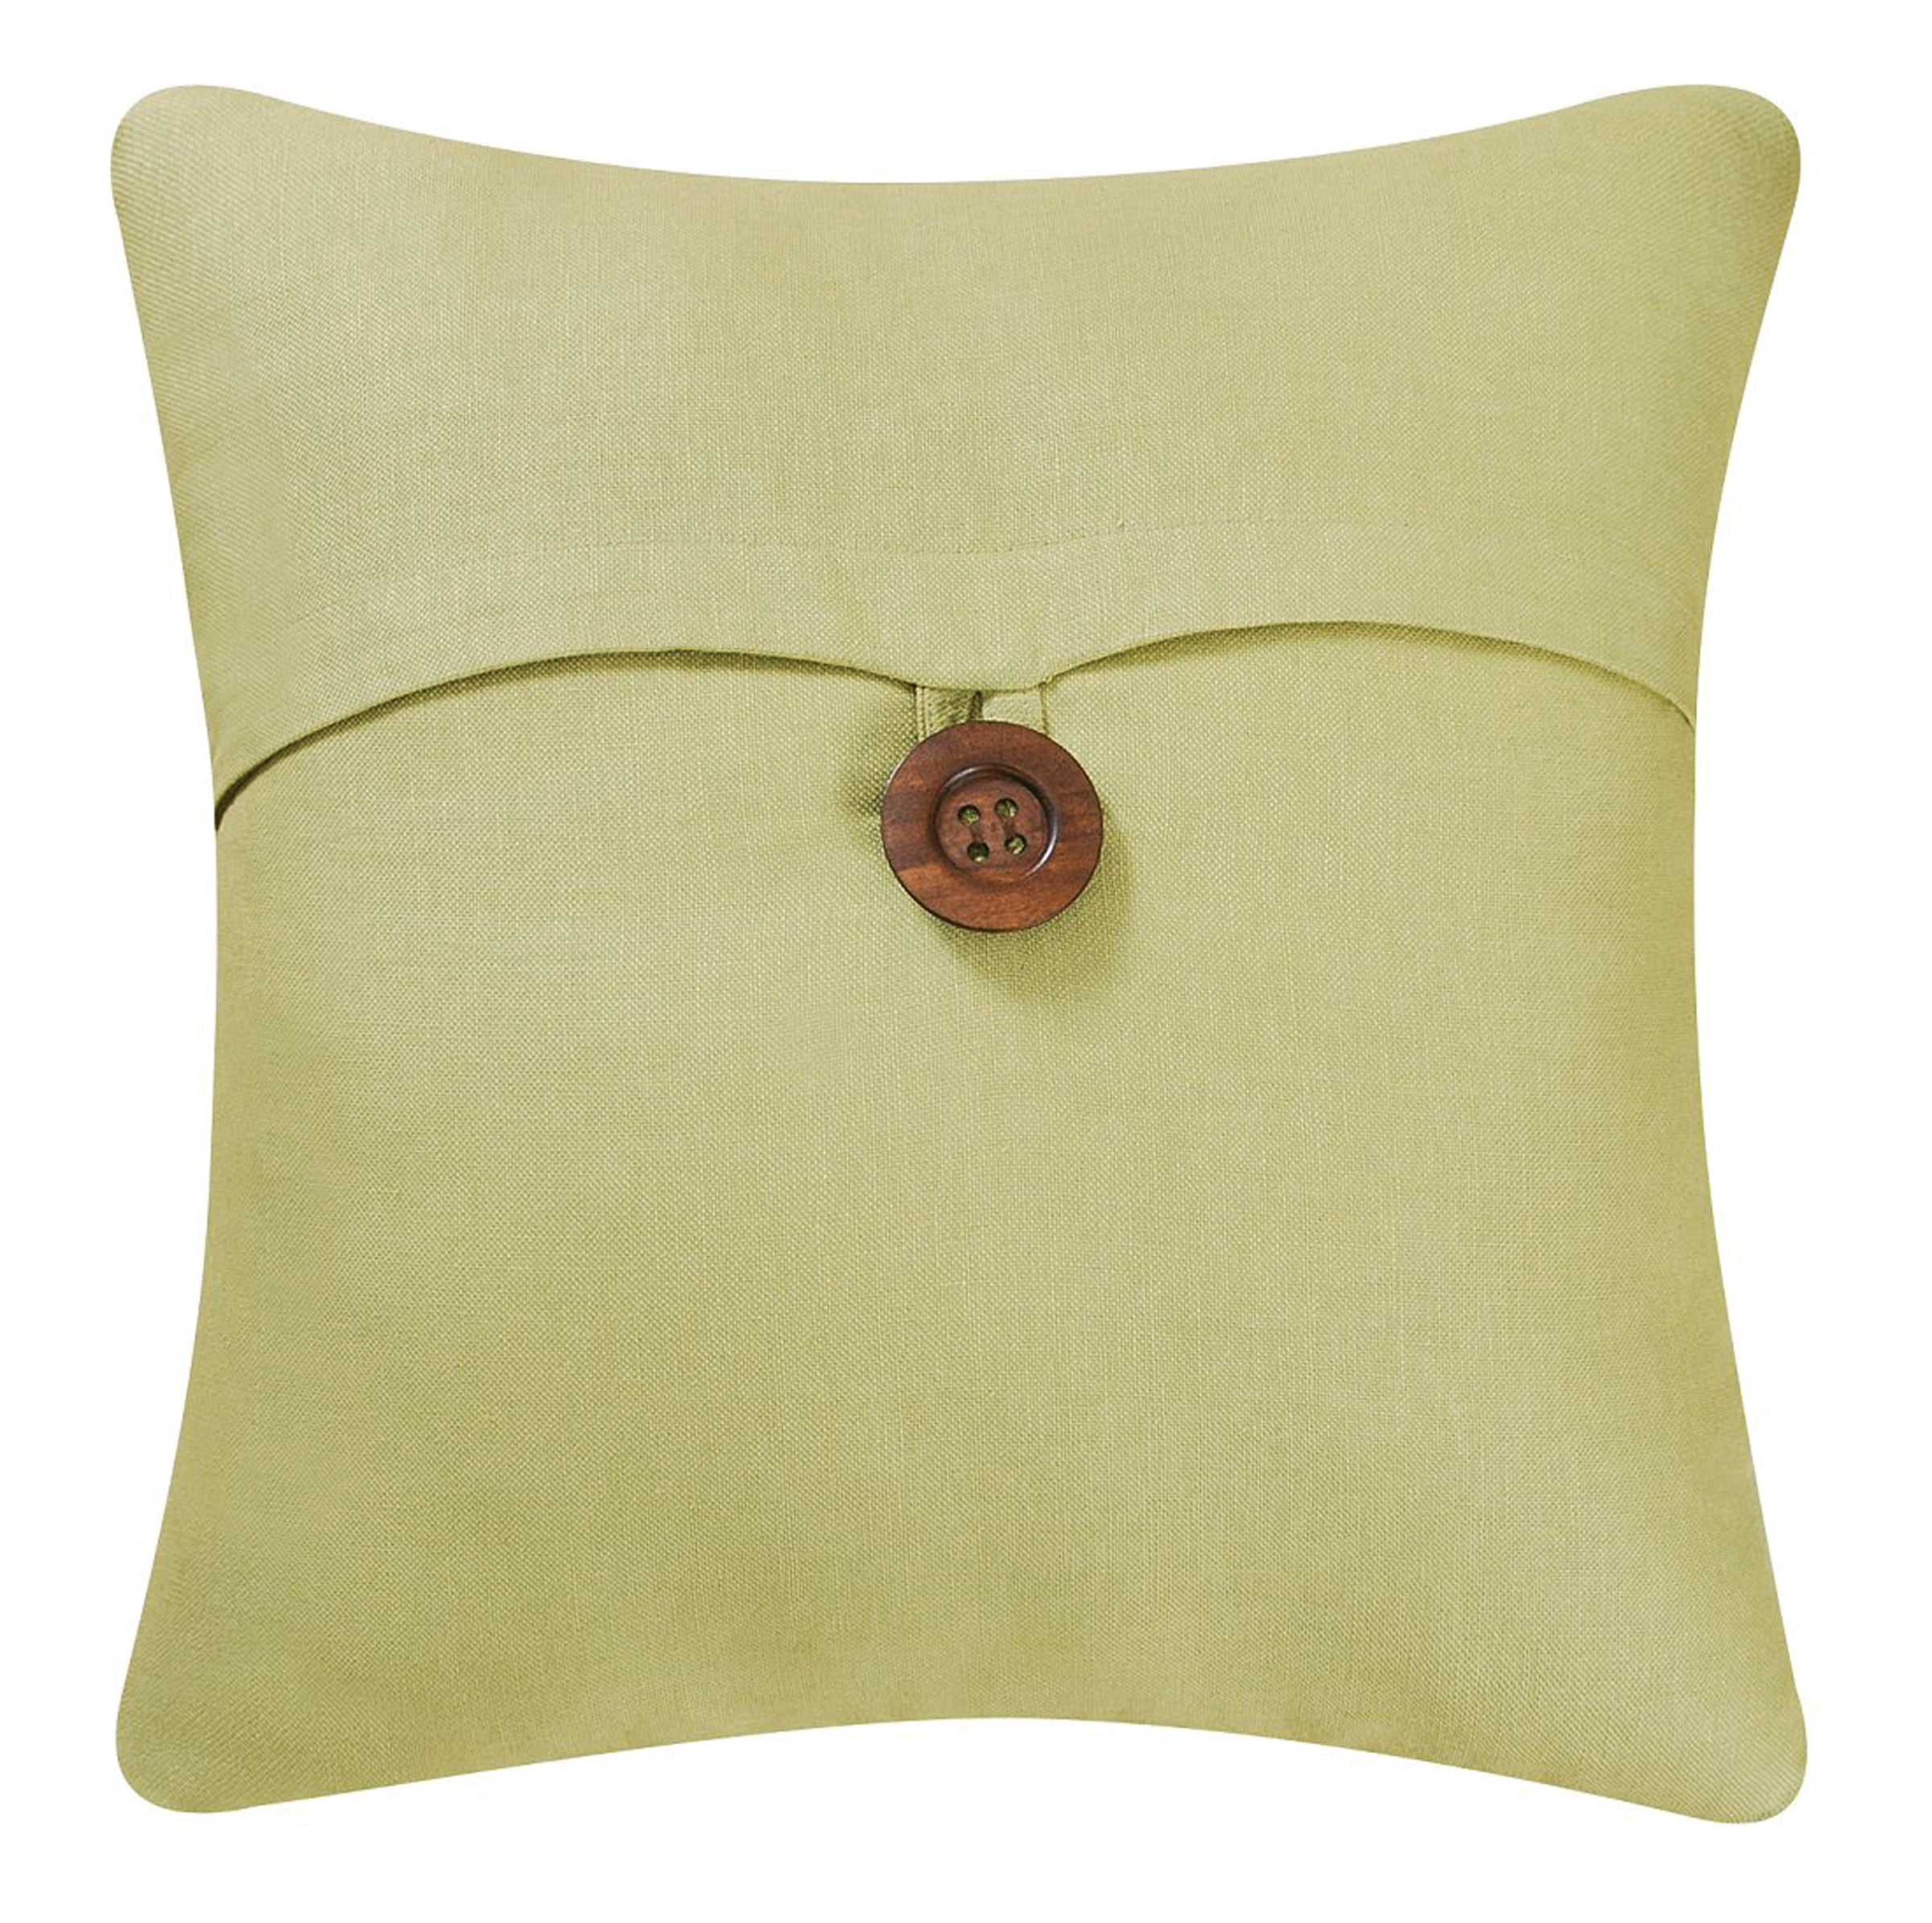 Throw Pillow For Sofa Couch